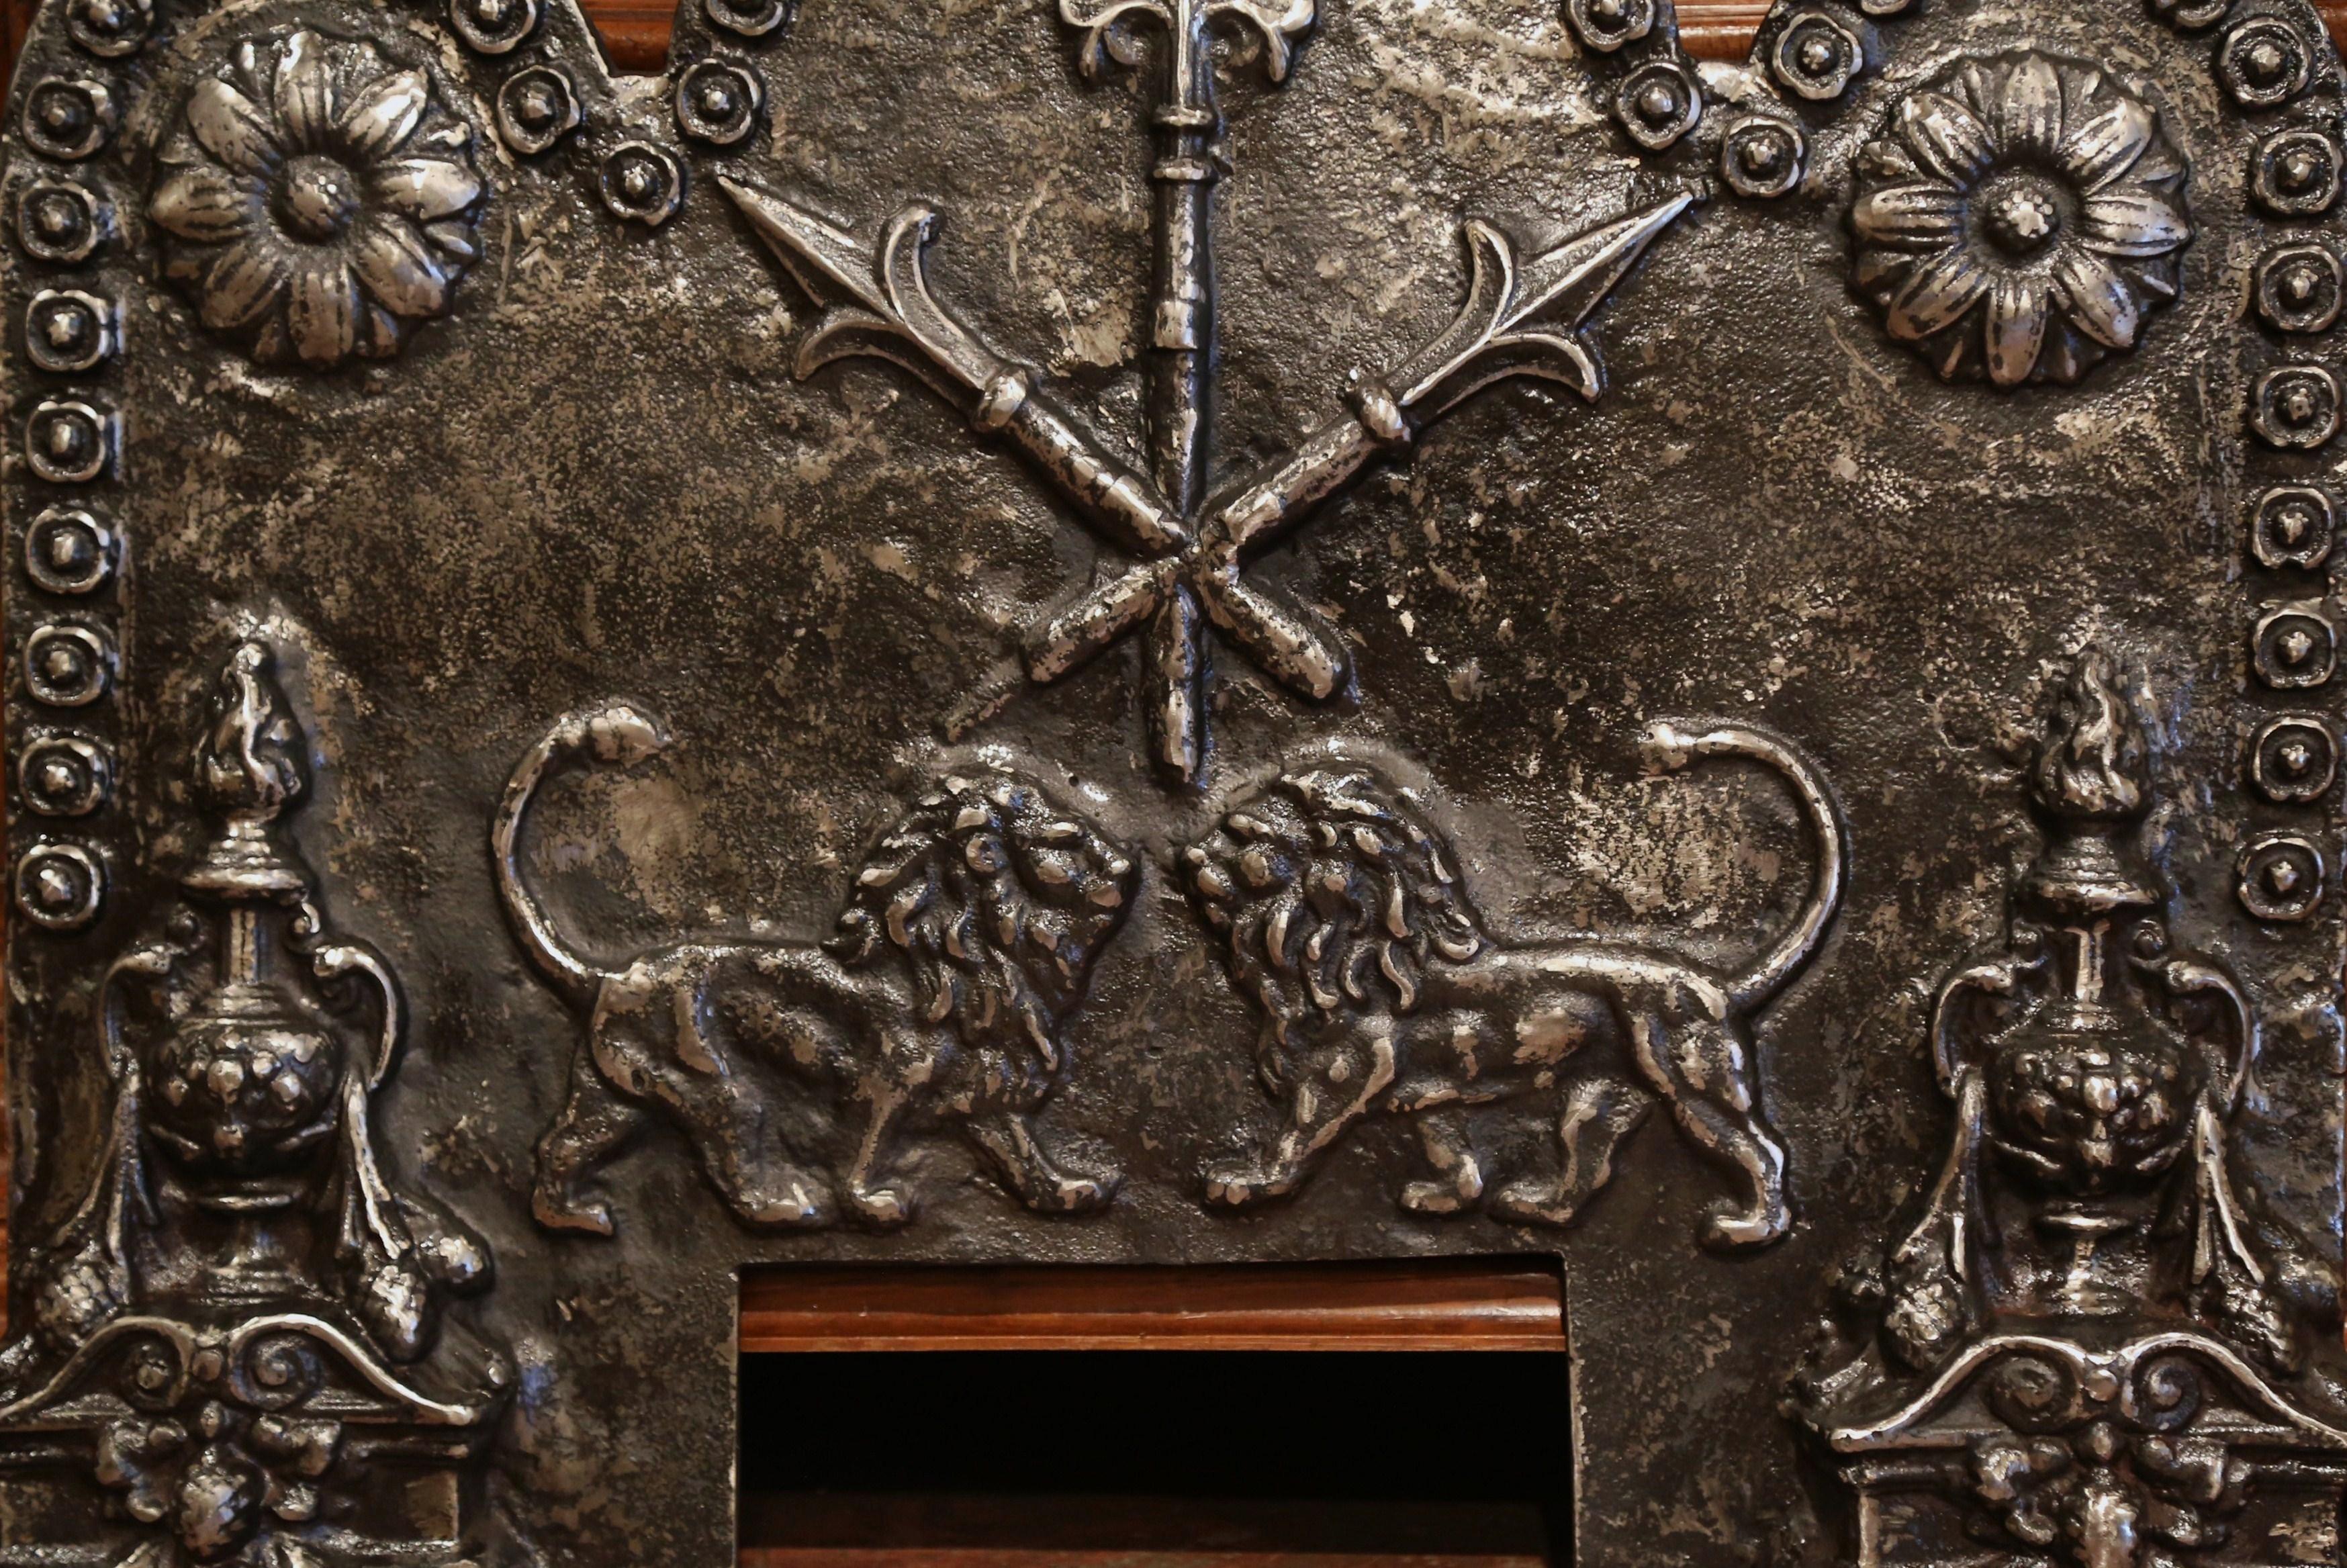 This large antique iron fire back was crafted in France, circa 1780. The heavy plaque features three elegant arches with round medallions in each corner, the fire back is decorated with a pair of roaring lions facing each other with crossed spears,